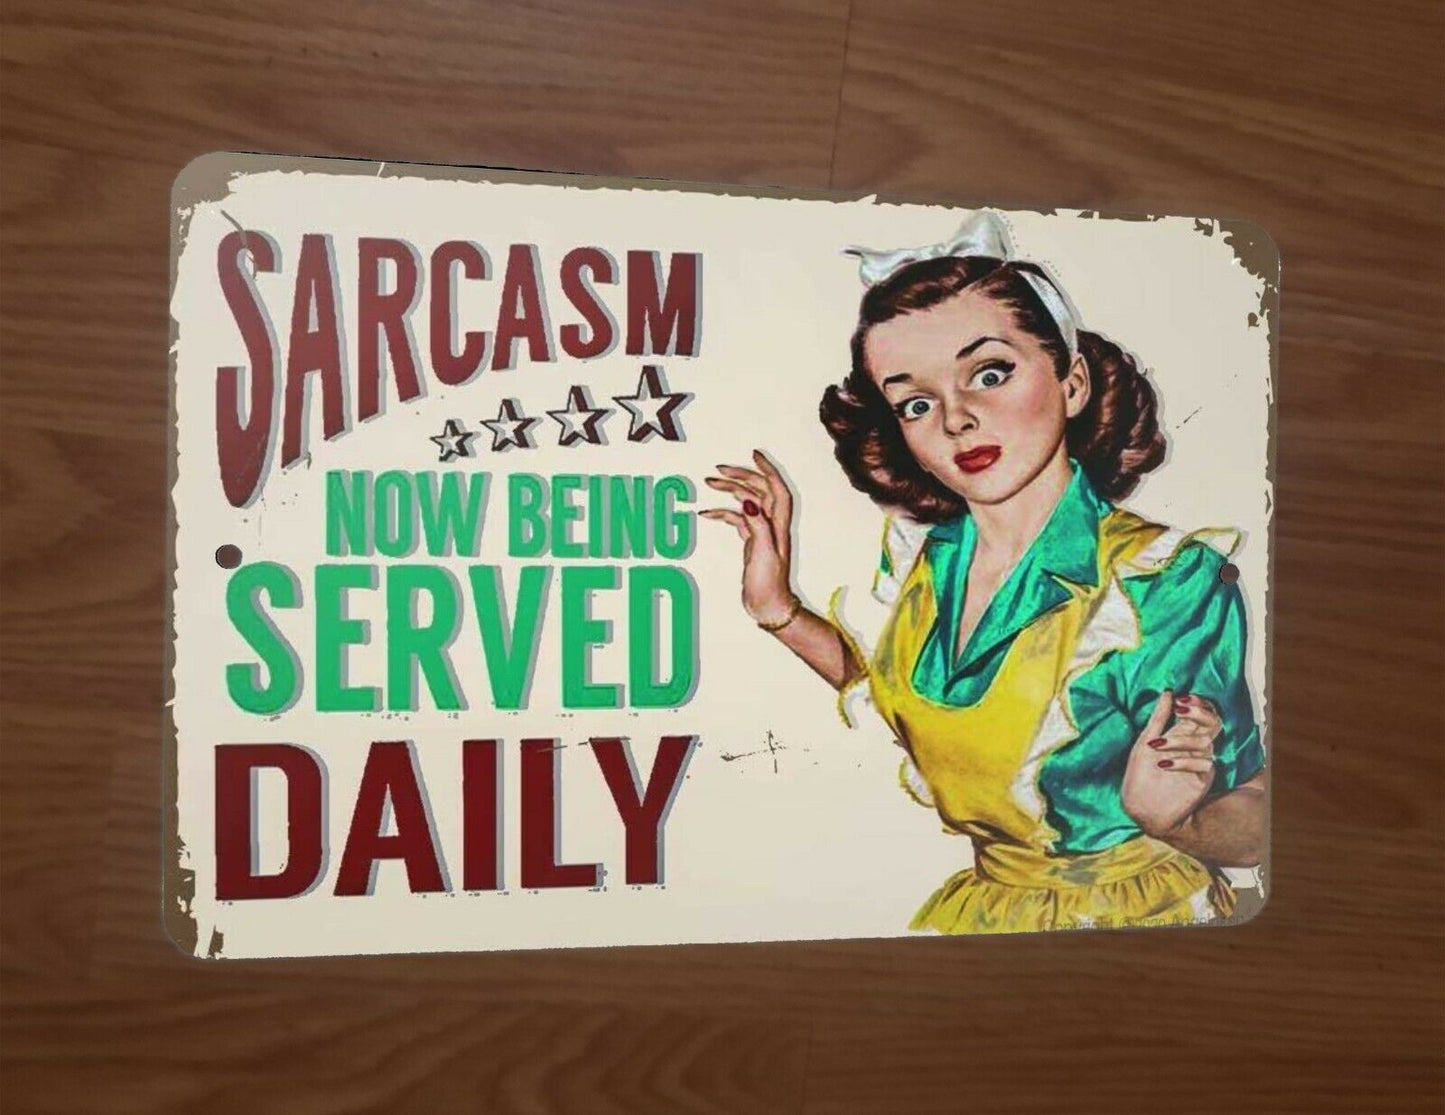 Sarcasm Now Being Served Daily 8x12 Metal Wall Sign Garage Poster